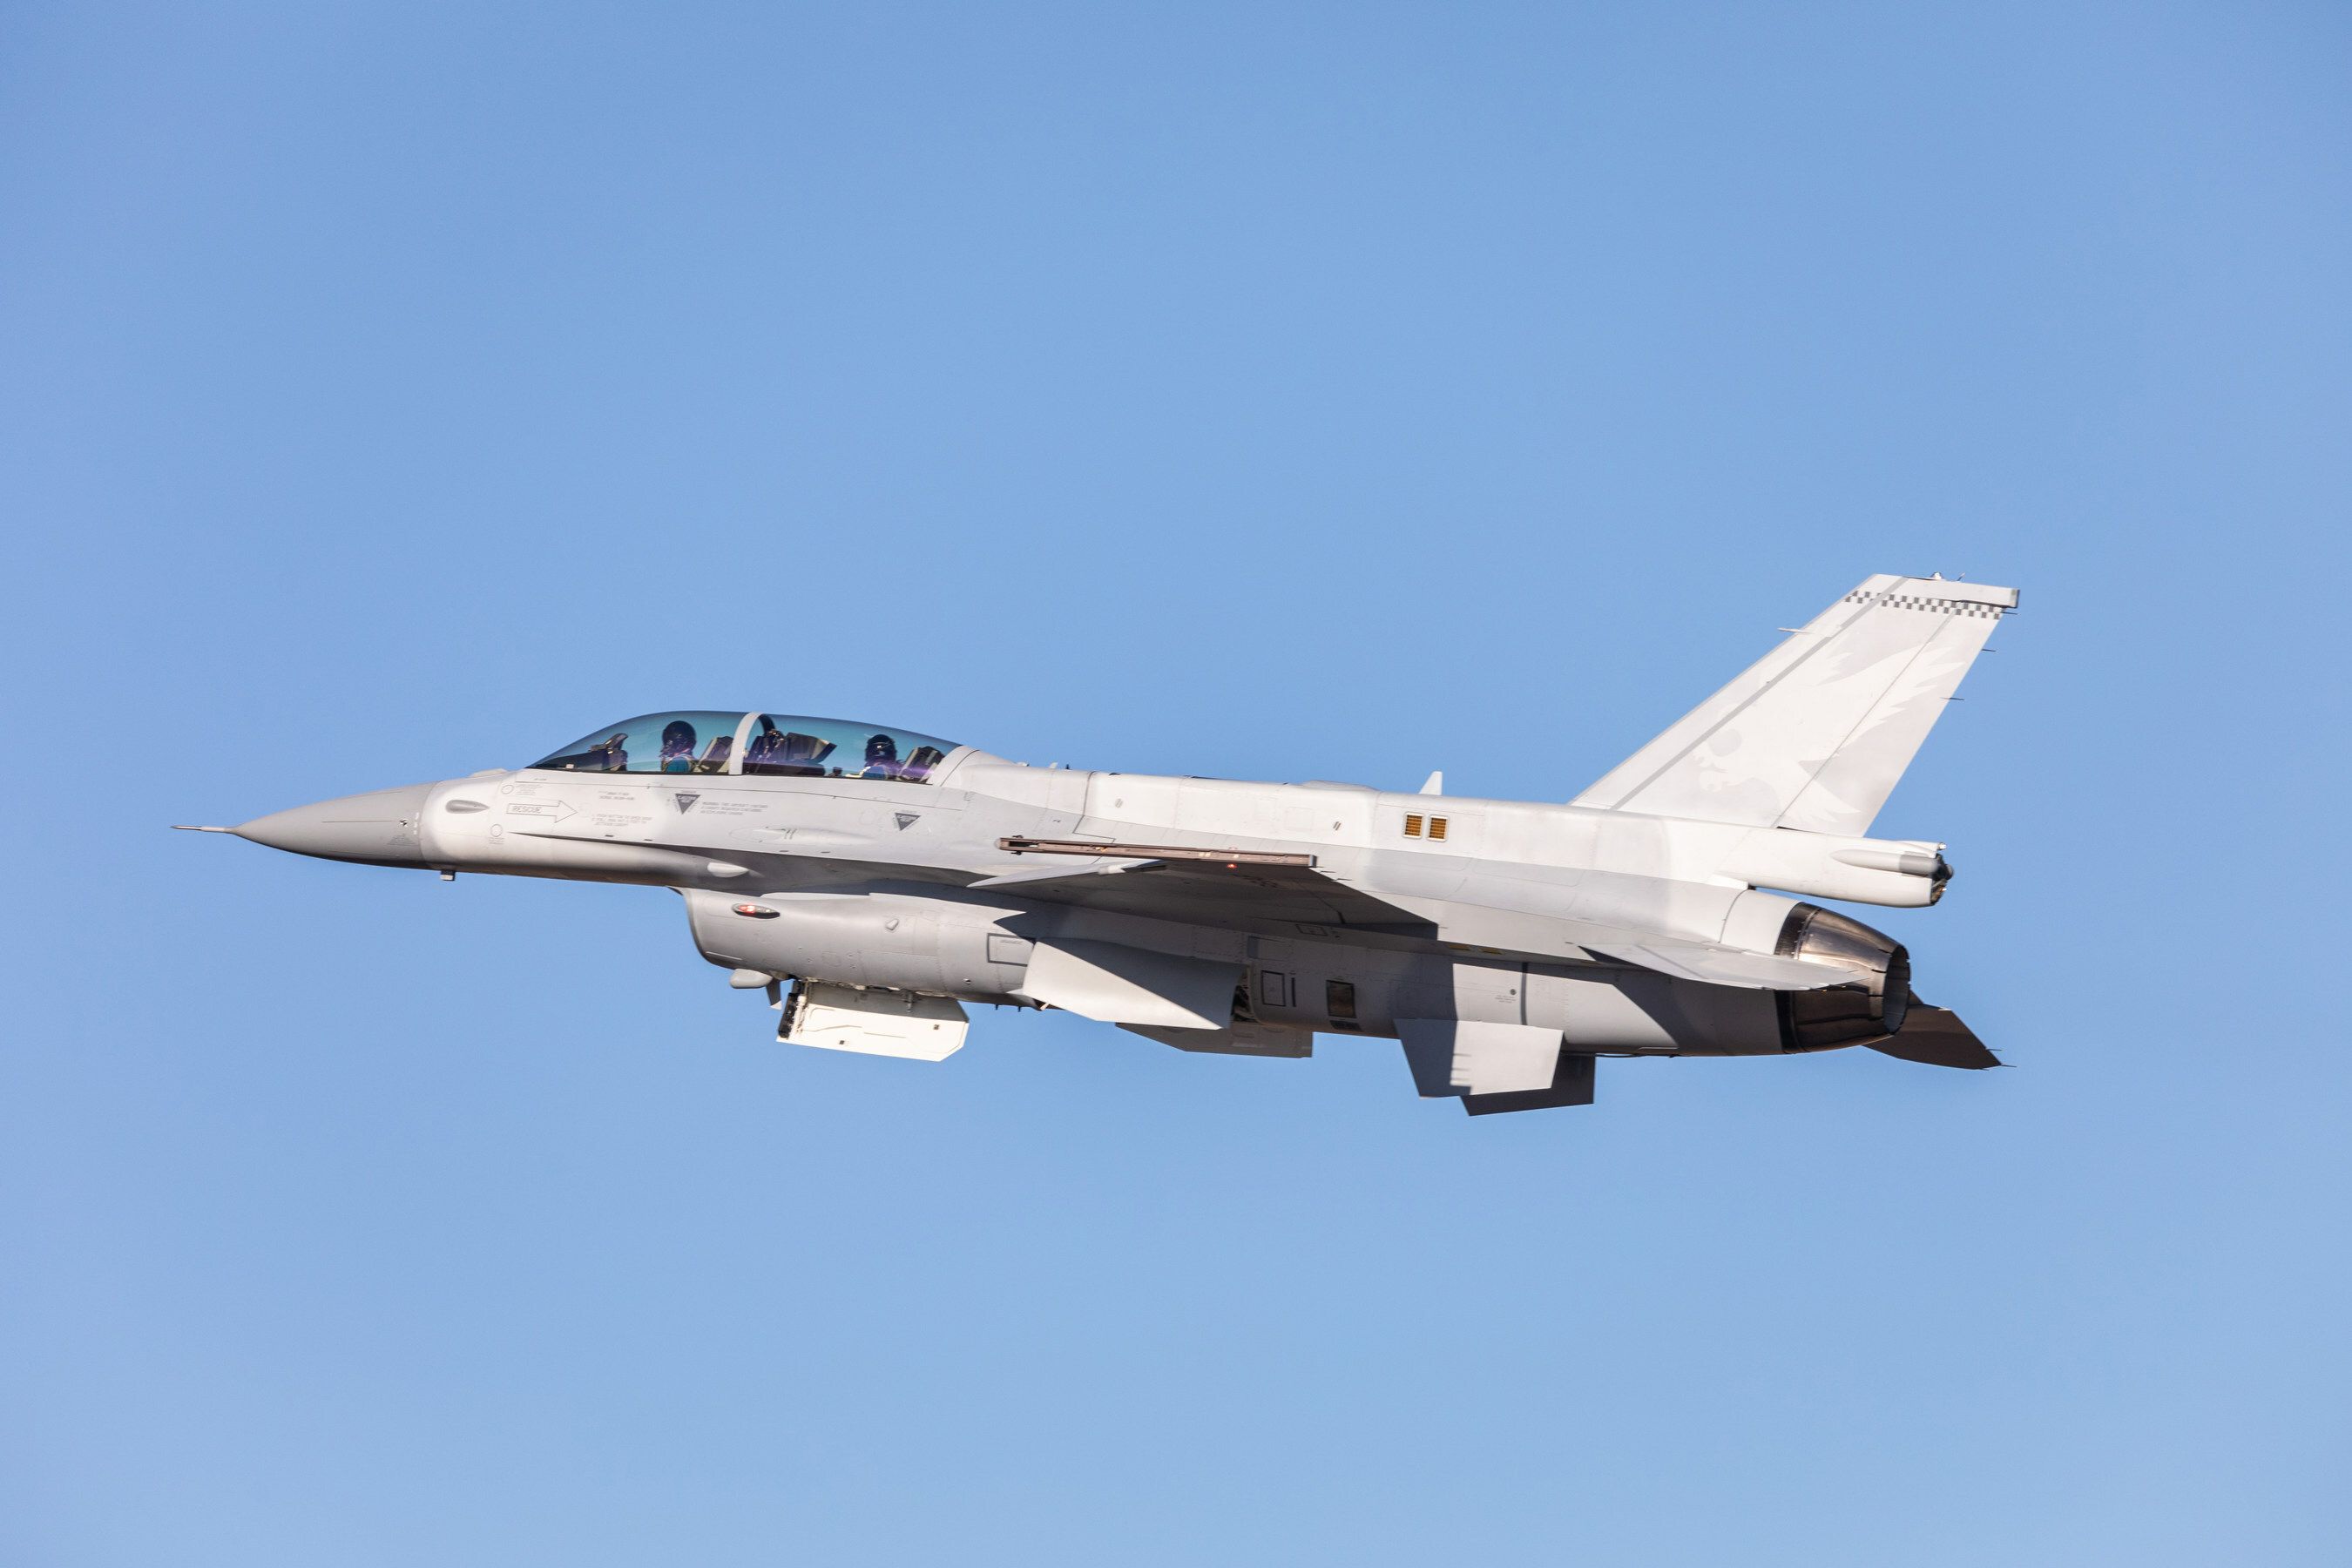 The First Brand-New F-16 Block 70 Takes Skies